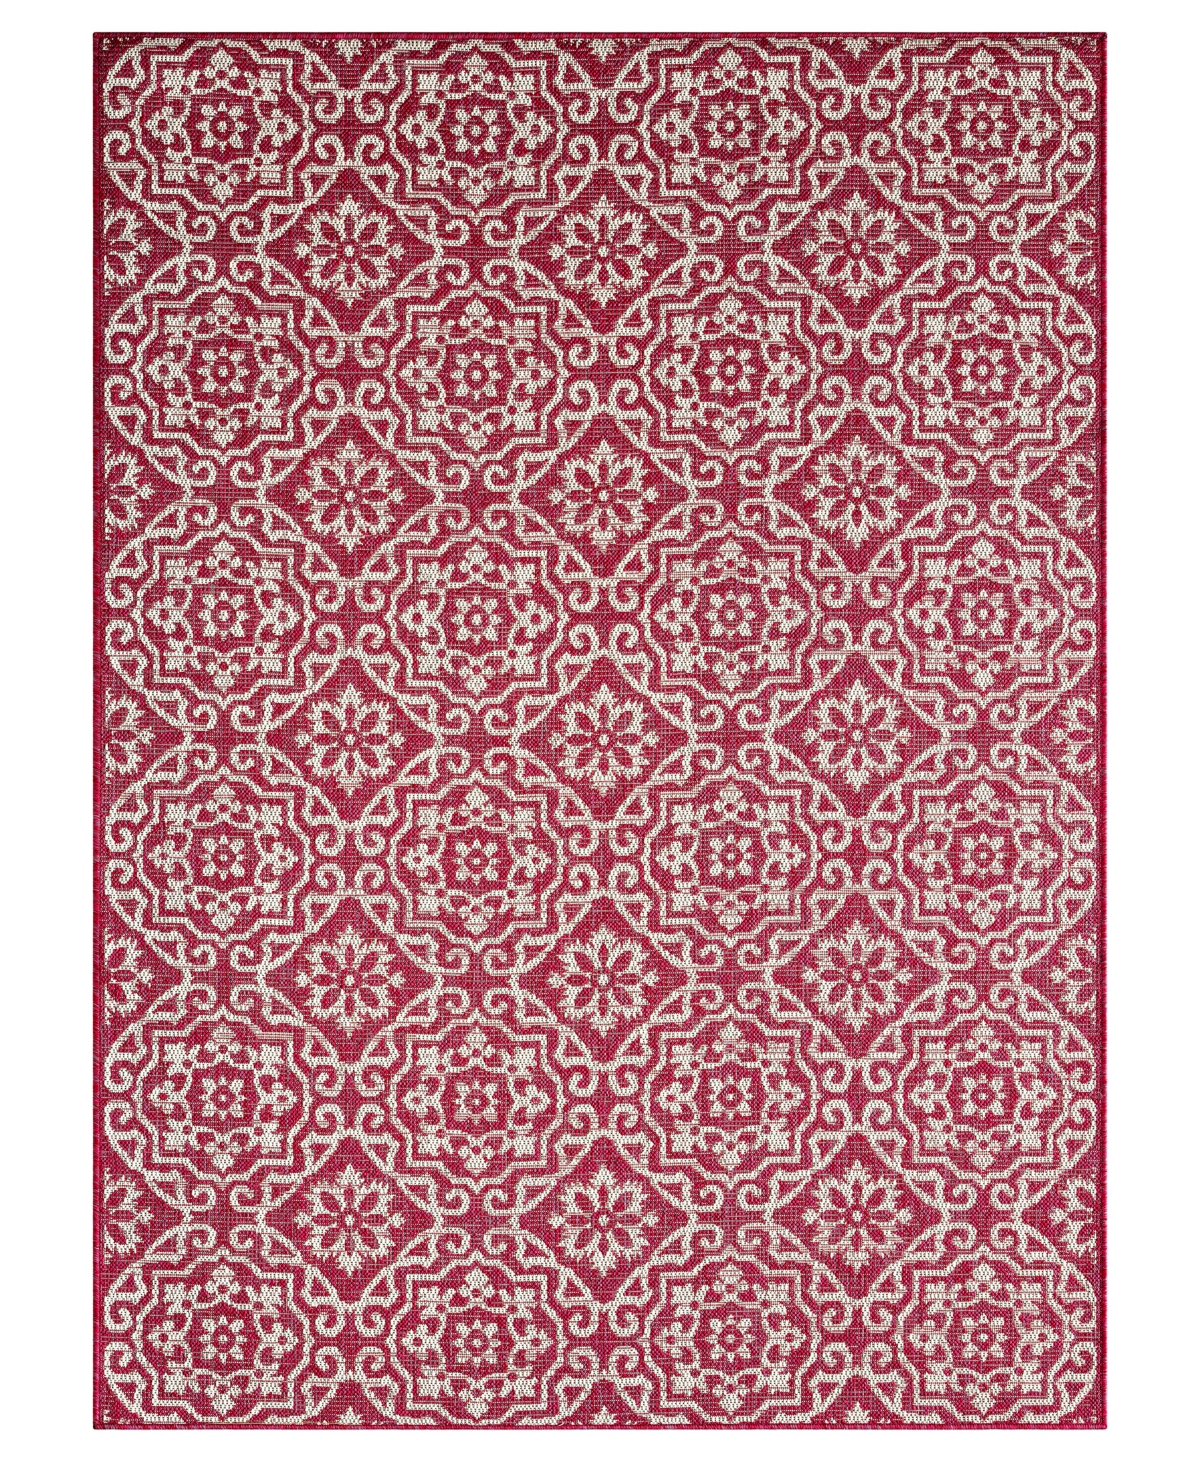 Nicole Miller Patio Country Danica 5'2" X 7'2" Outdoor Area Rug In Red